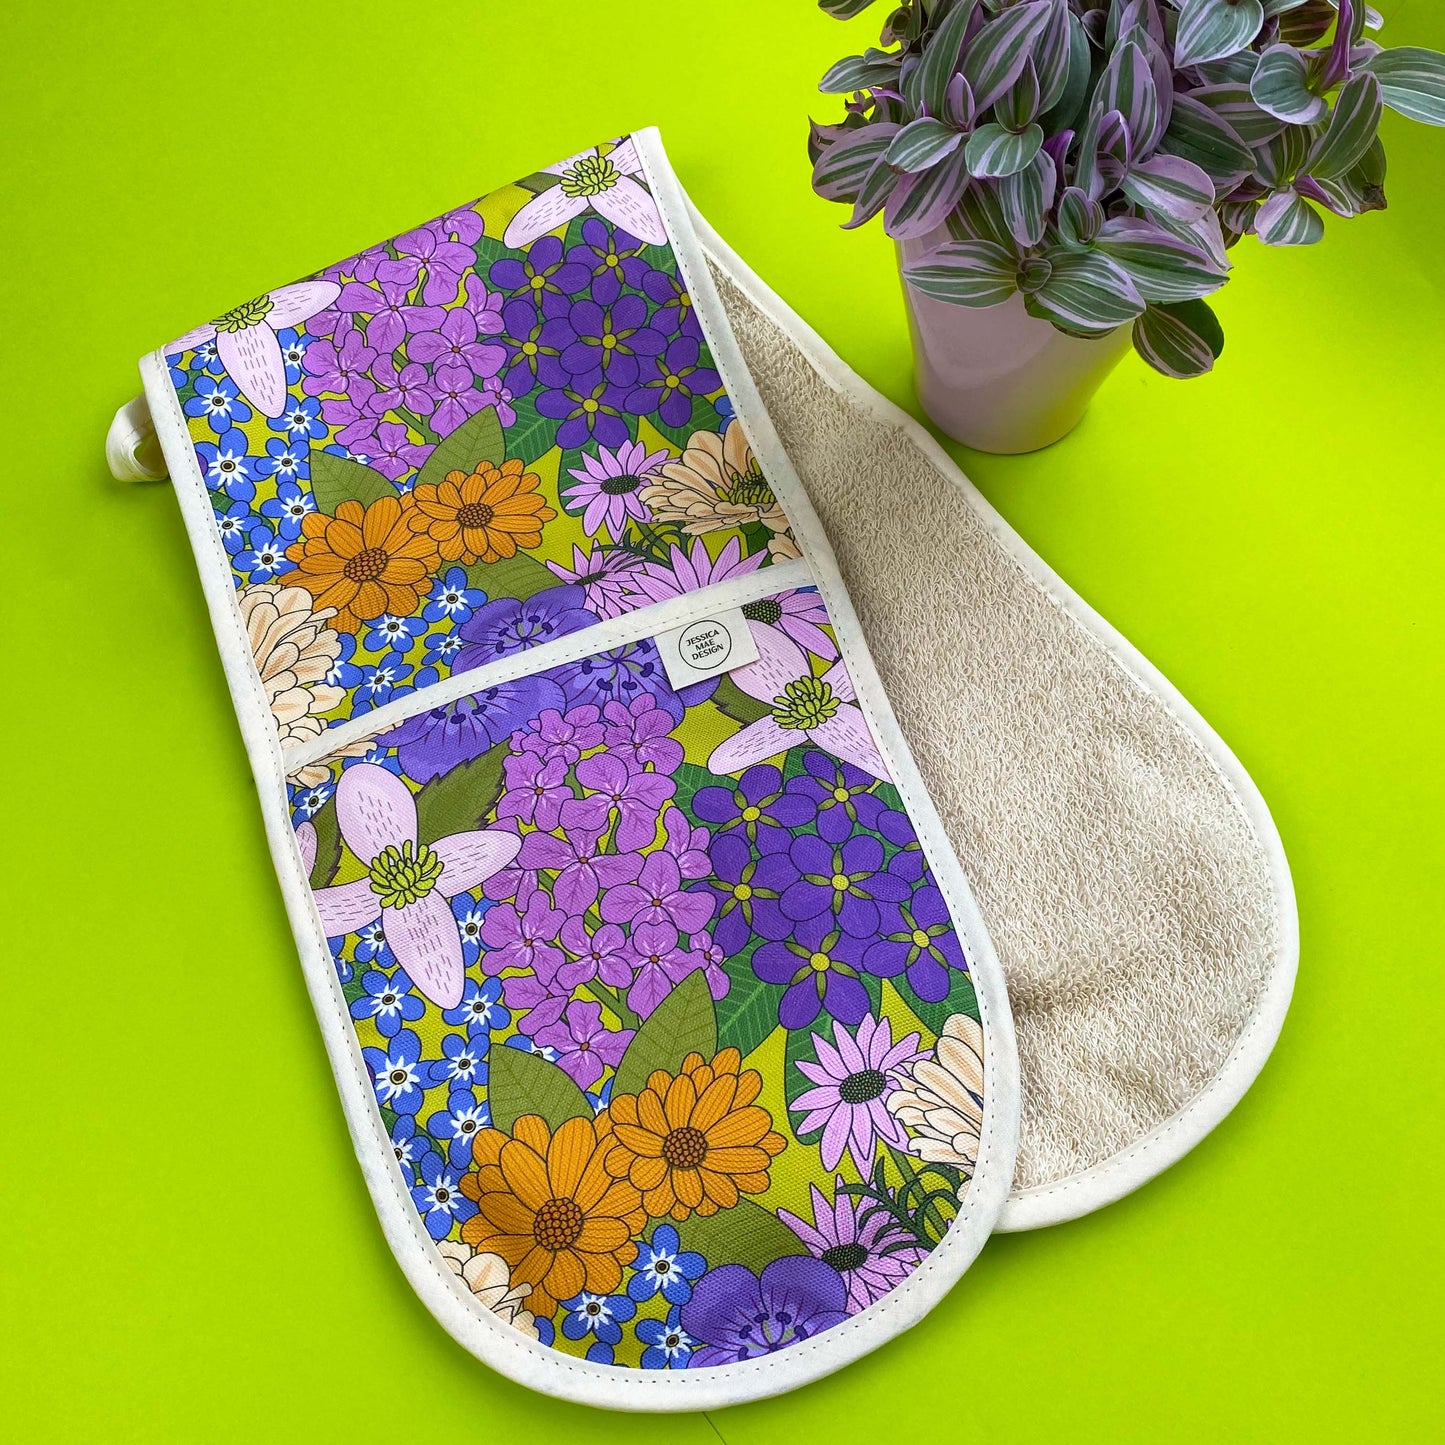 The Retro Floral Oven Gloves